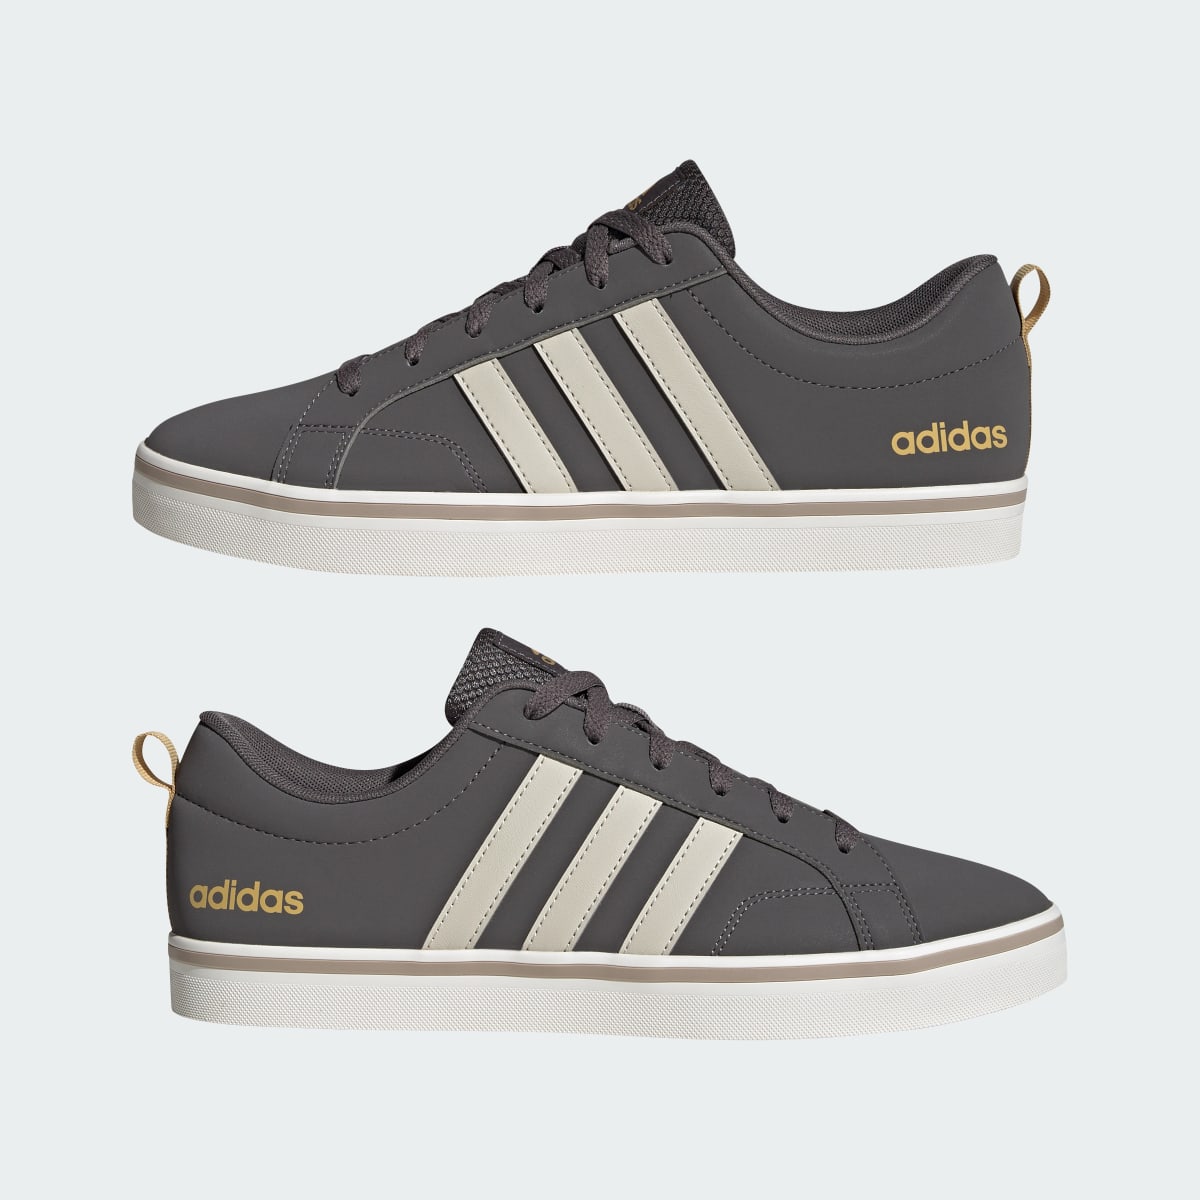 Adidas VS Pace 2.0 Schuh. 8